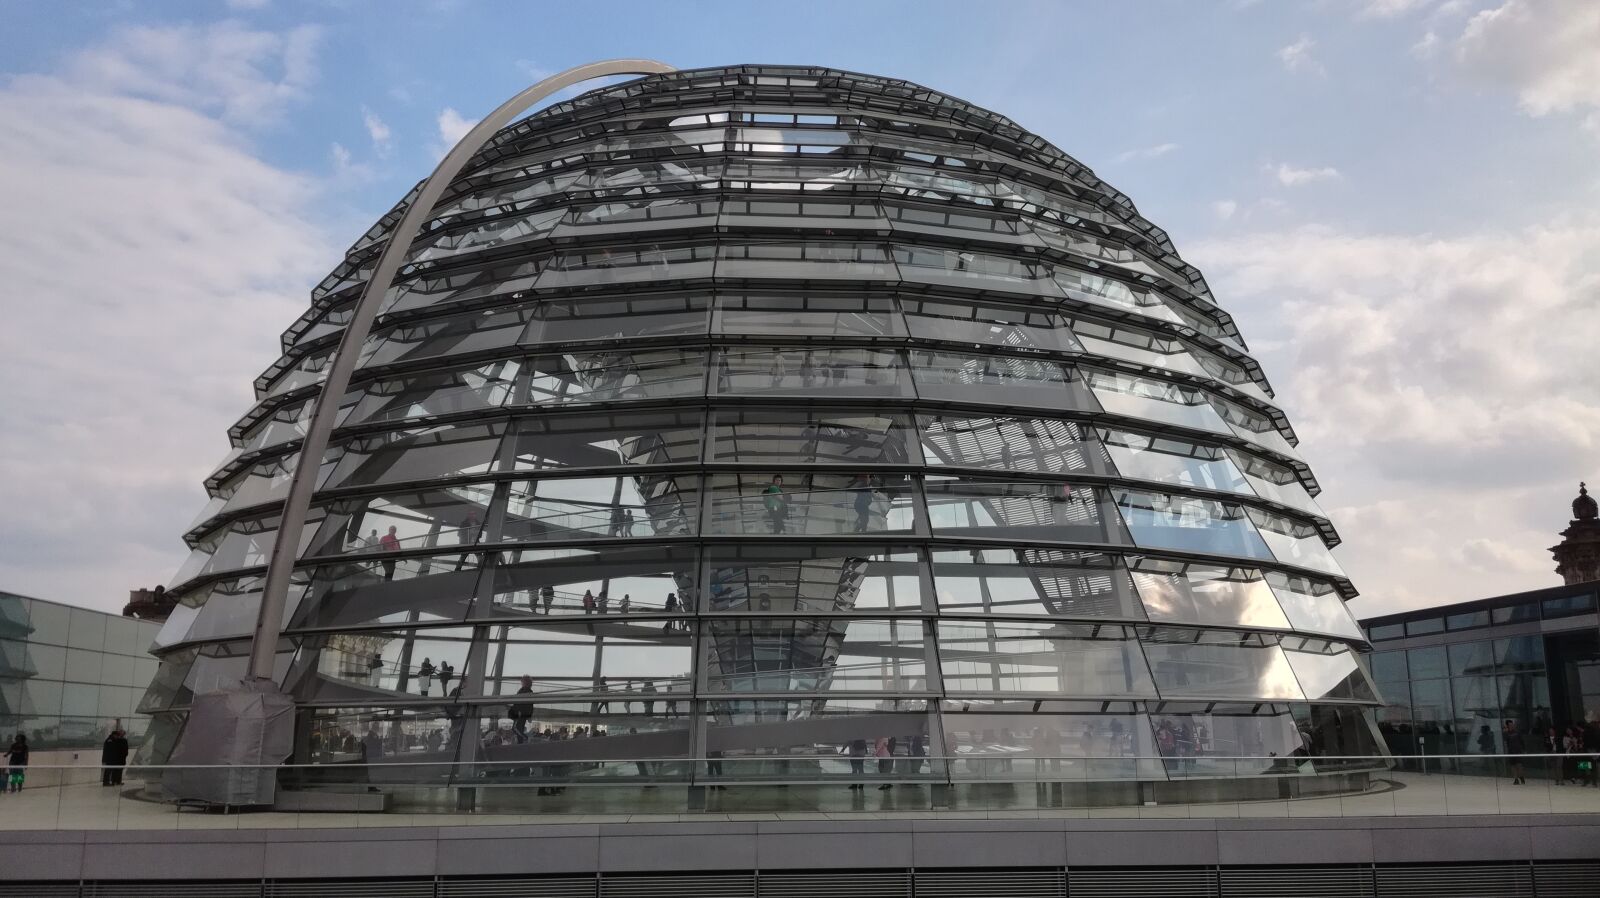 HUAWEI Honor 5C sample photo. Dome, reichstag, bundestag photography